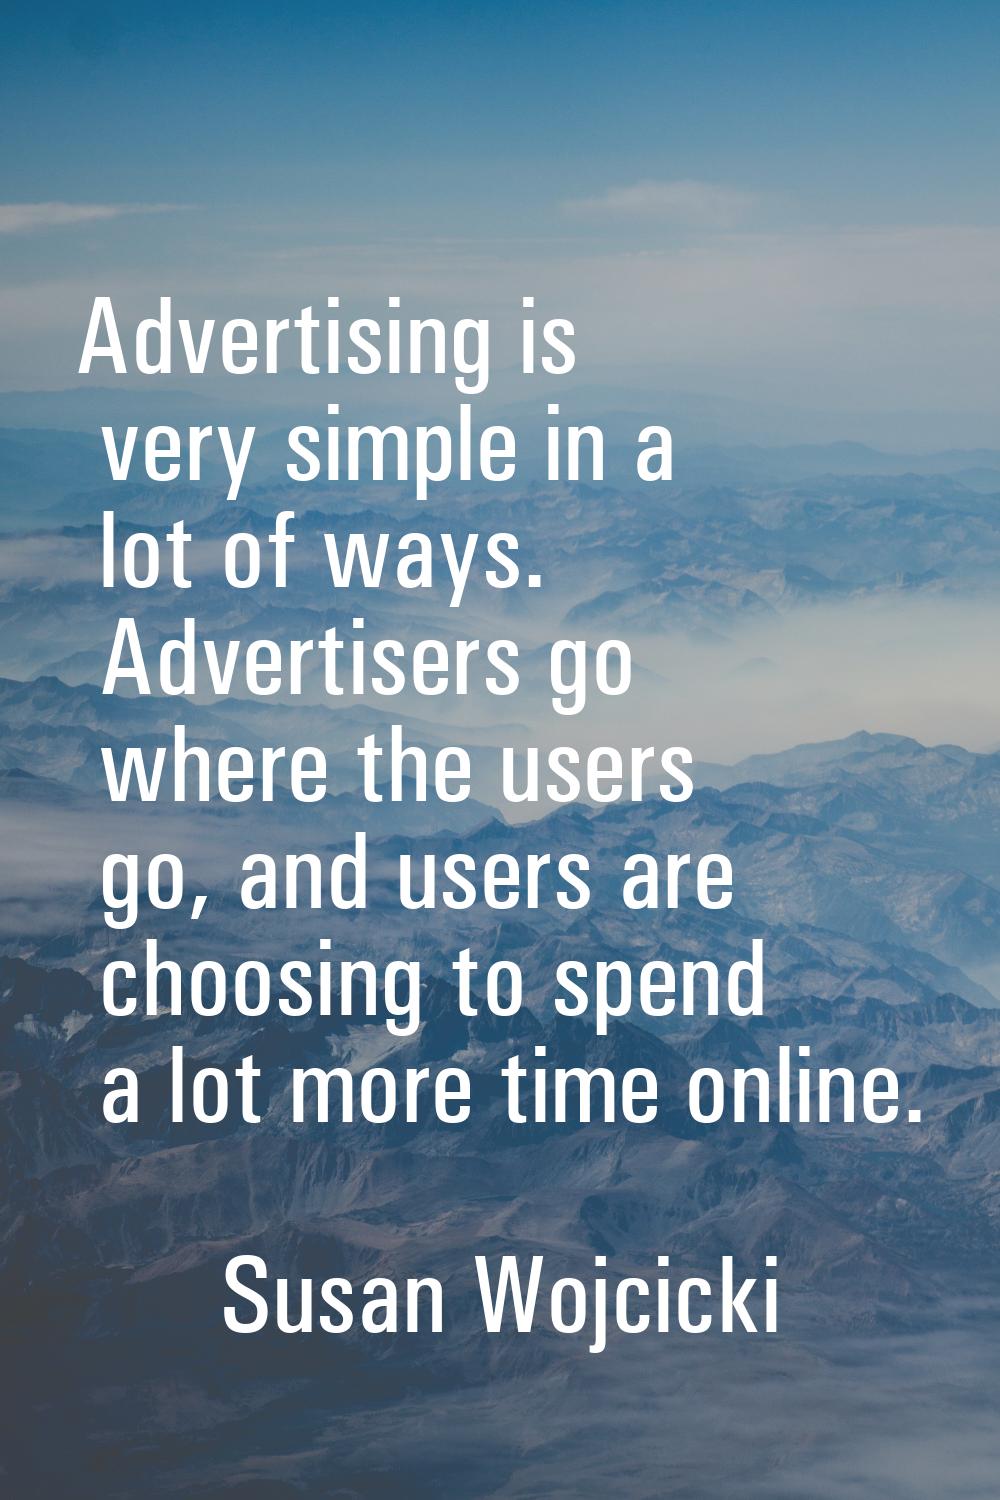 Advertising is very simple in a lot of ways. Advertisers go where the users go, and users are choos